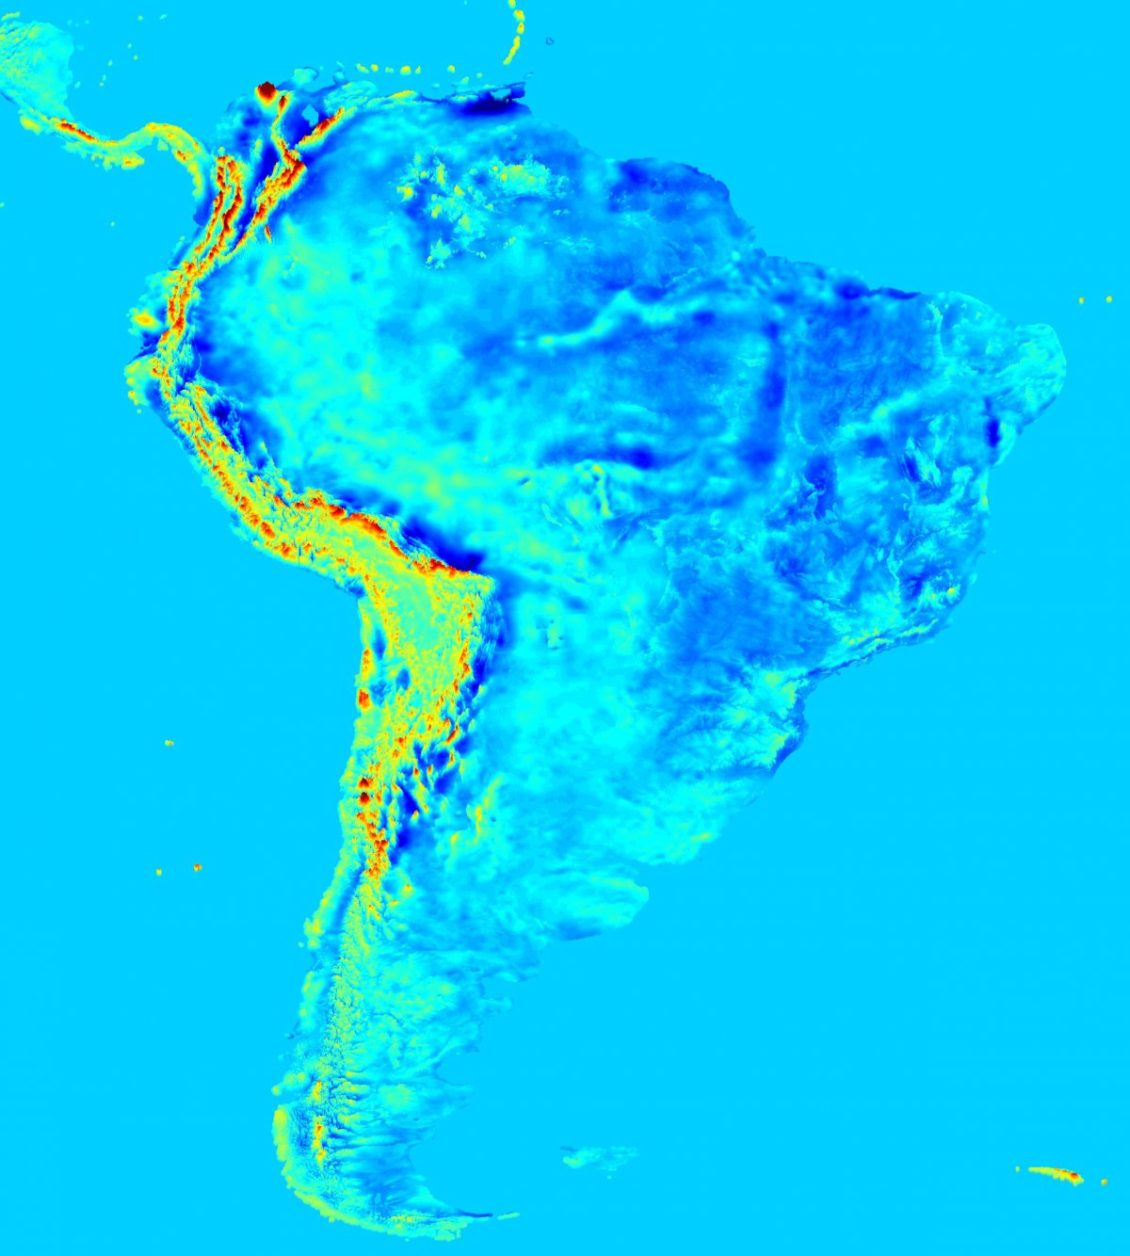 heres-south-america-you-can-see-the-great-gravity-of-the-andes-and-highlands-in-the-east-and-lower-gravity-of-brazils-flatter-western-reaches